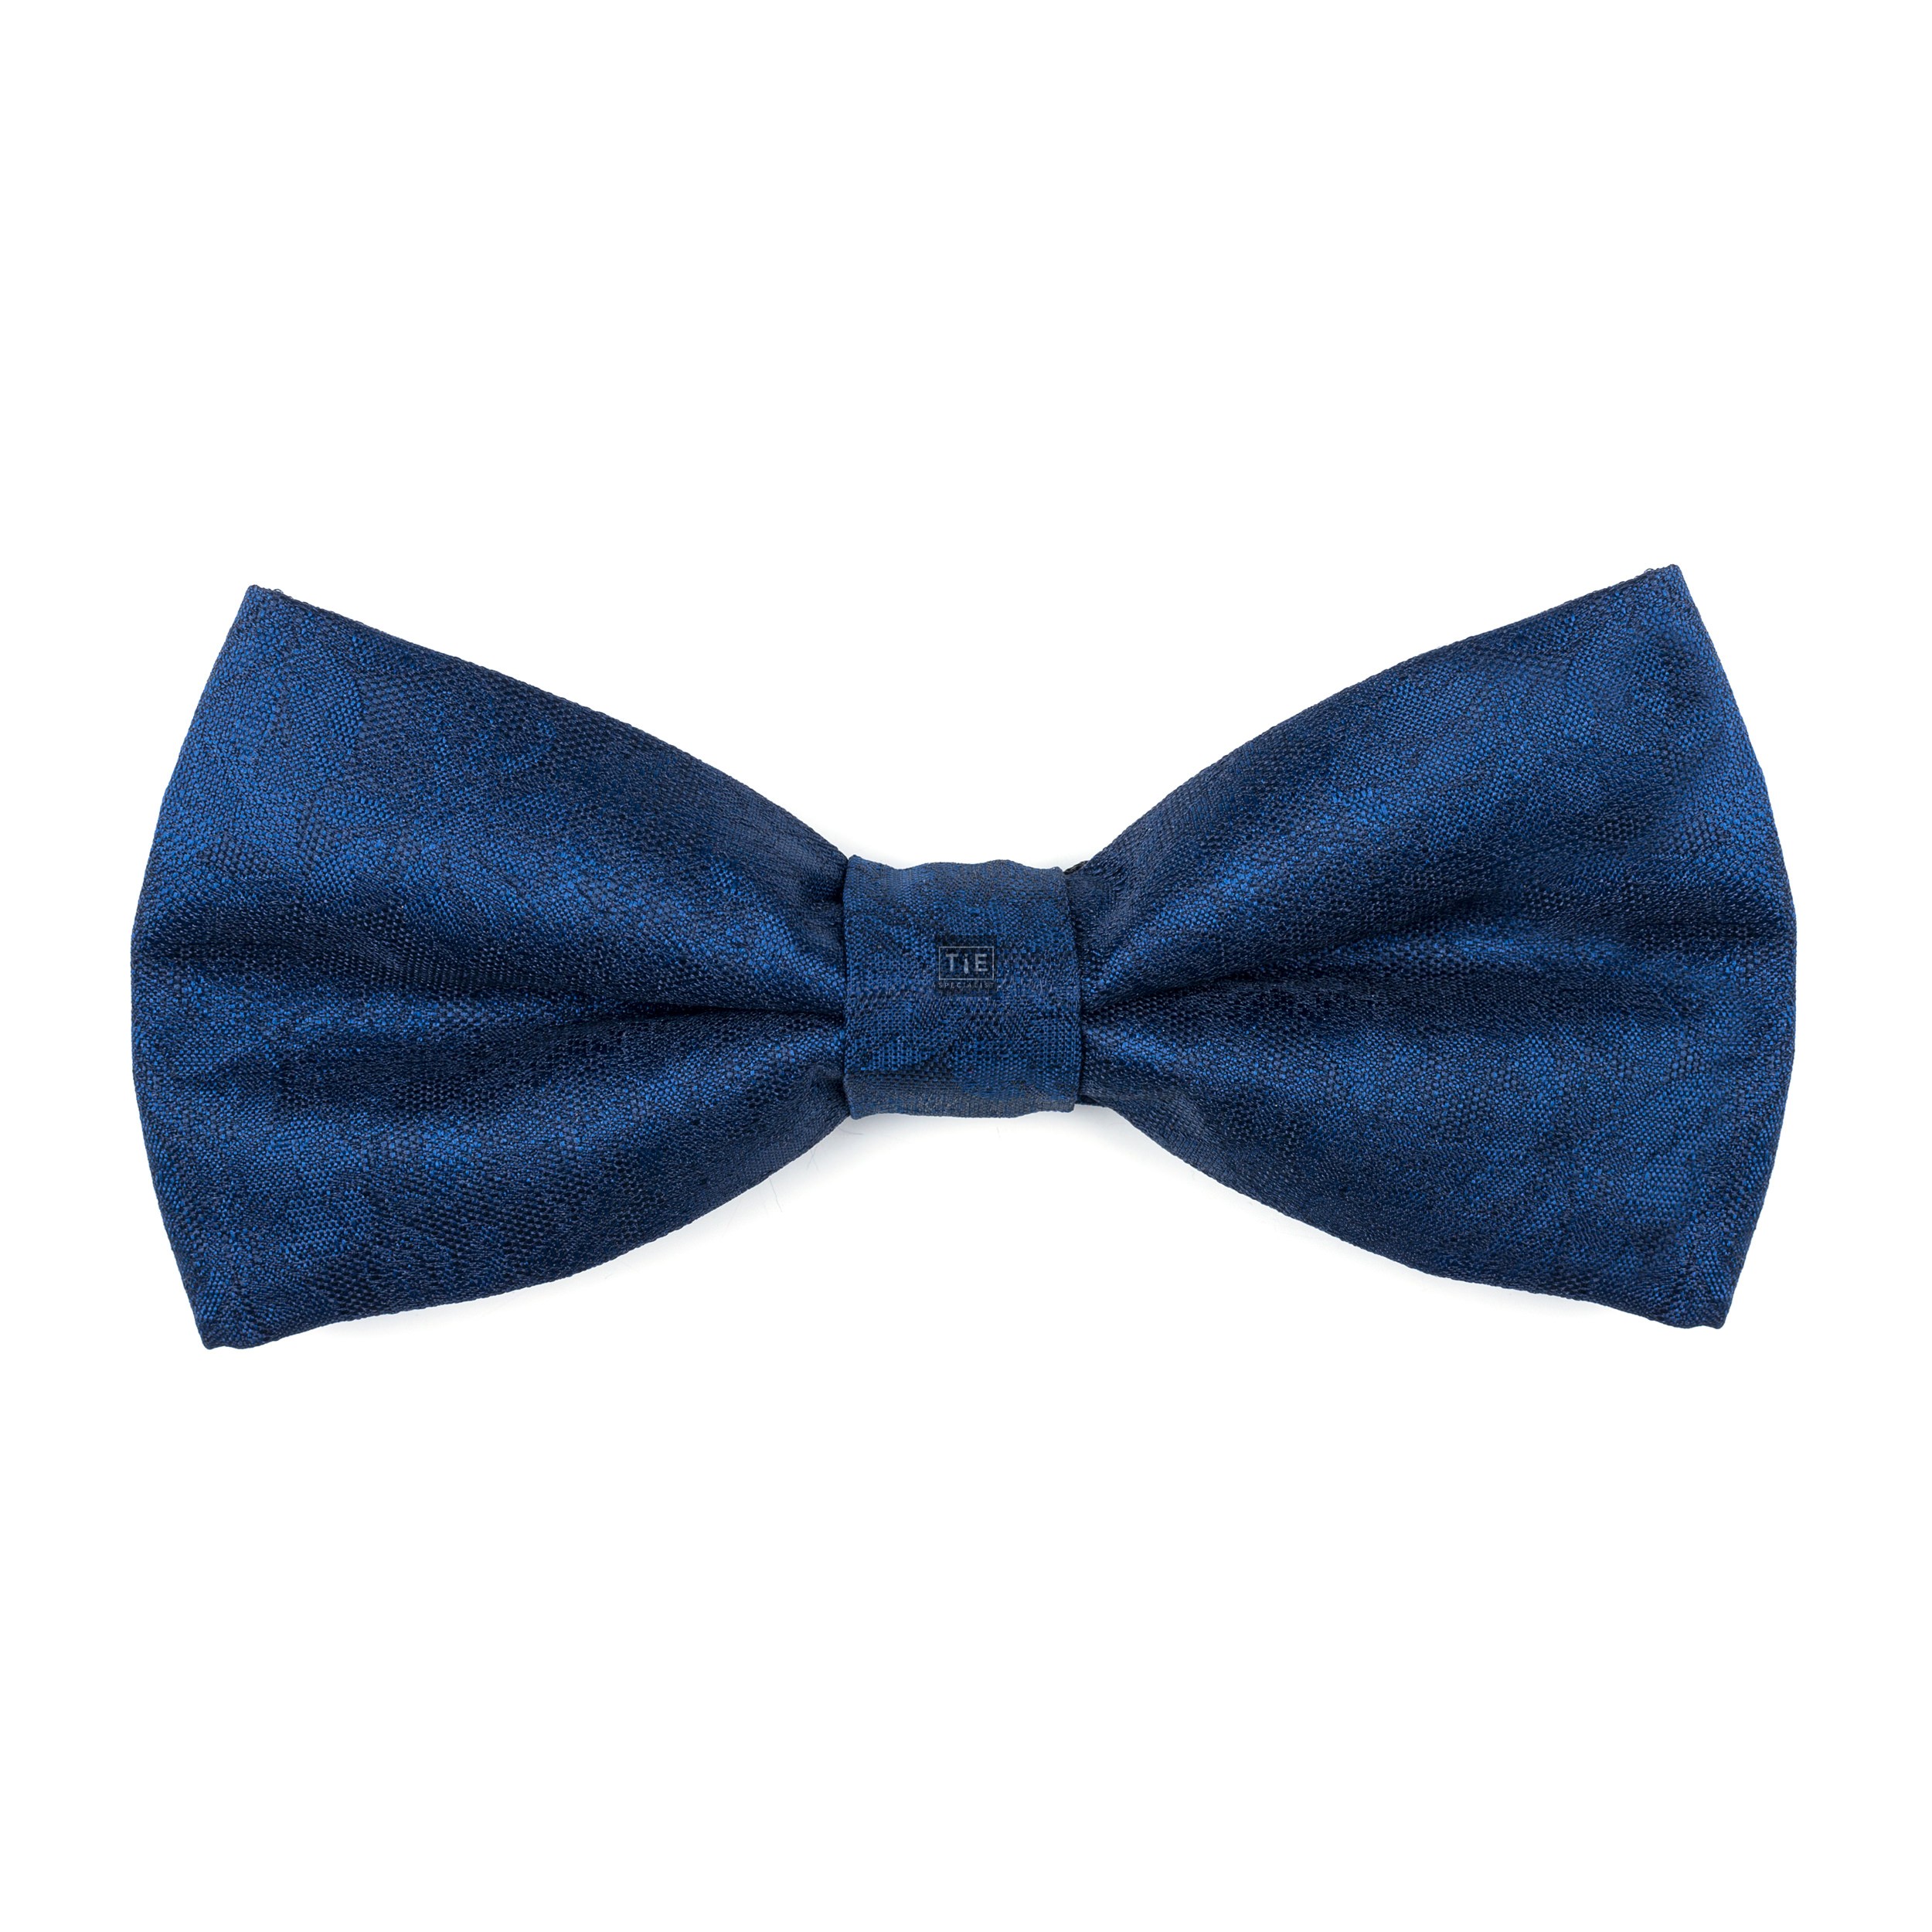 Twilight Blue Floral Bow Tie - Patterned Blue Pre-Tied Wedding Bow Tie